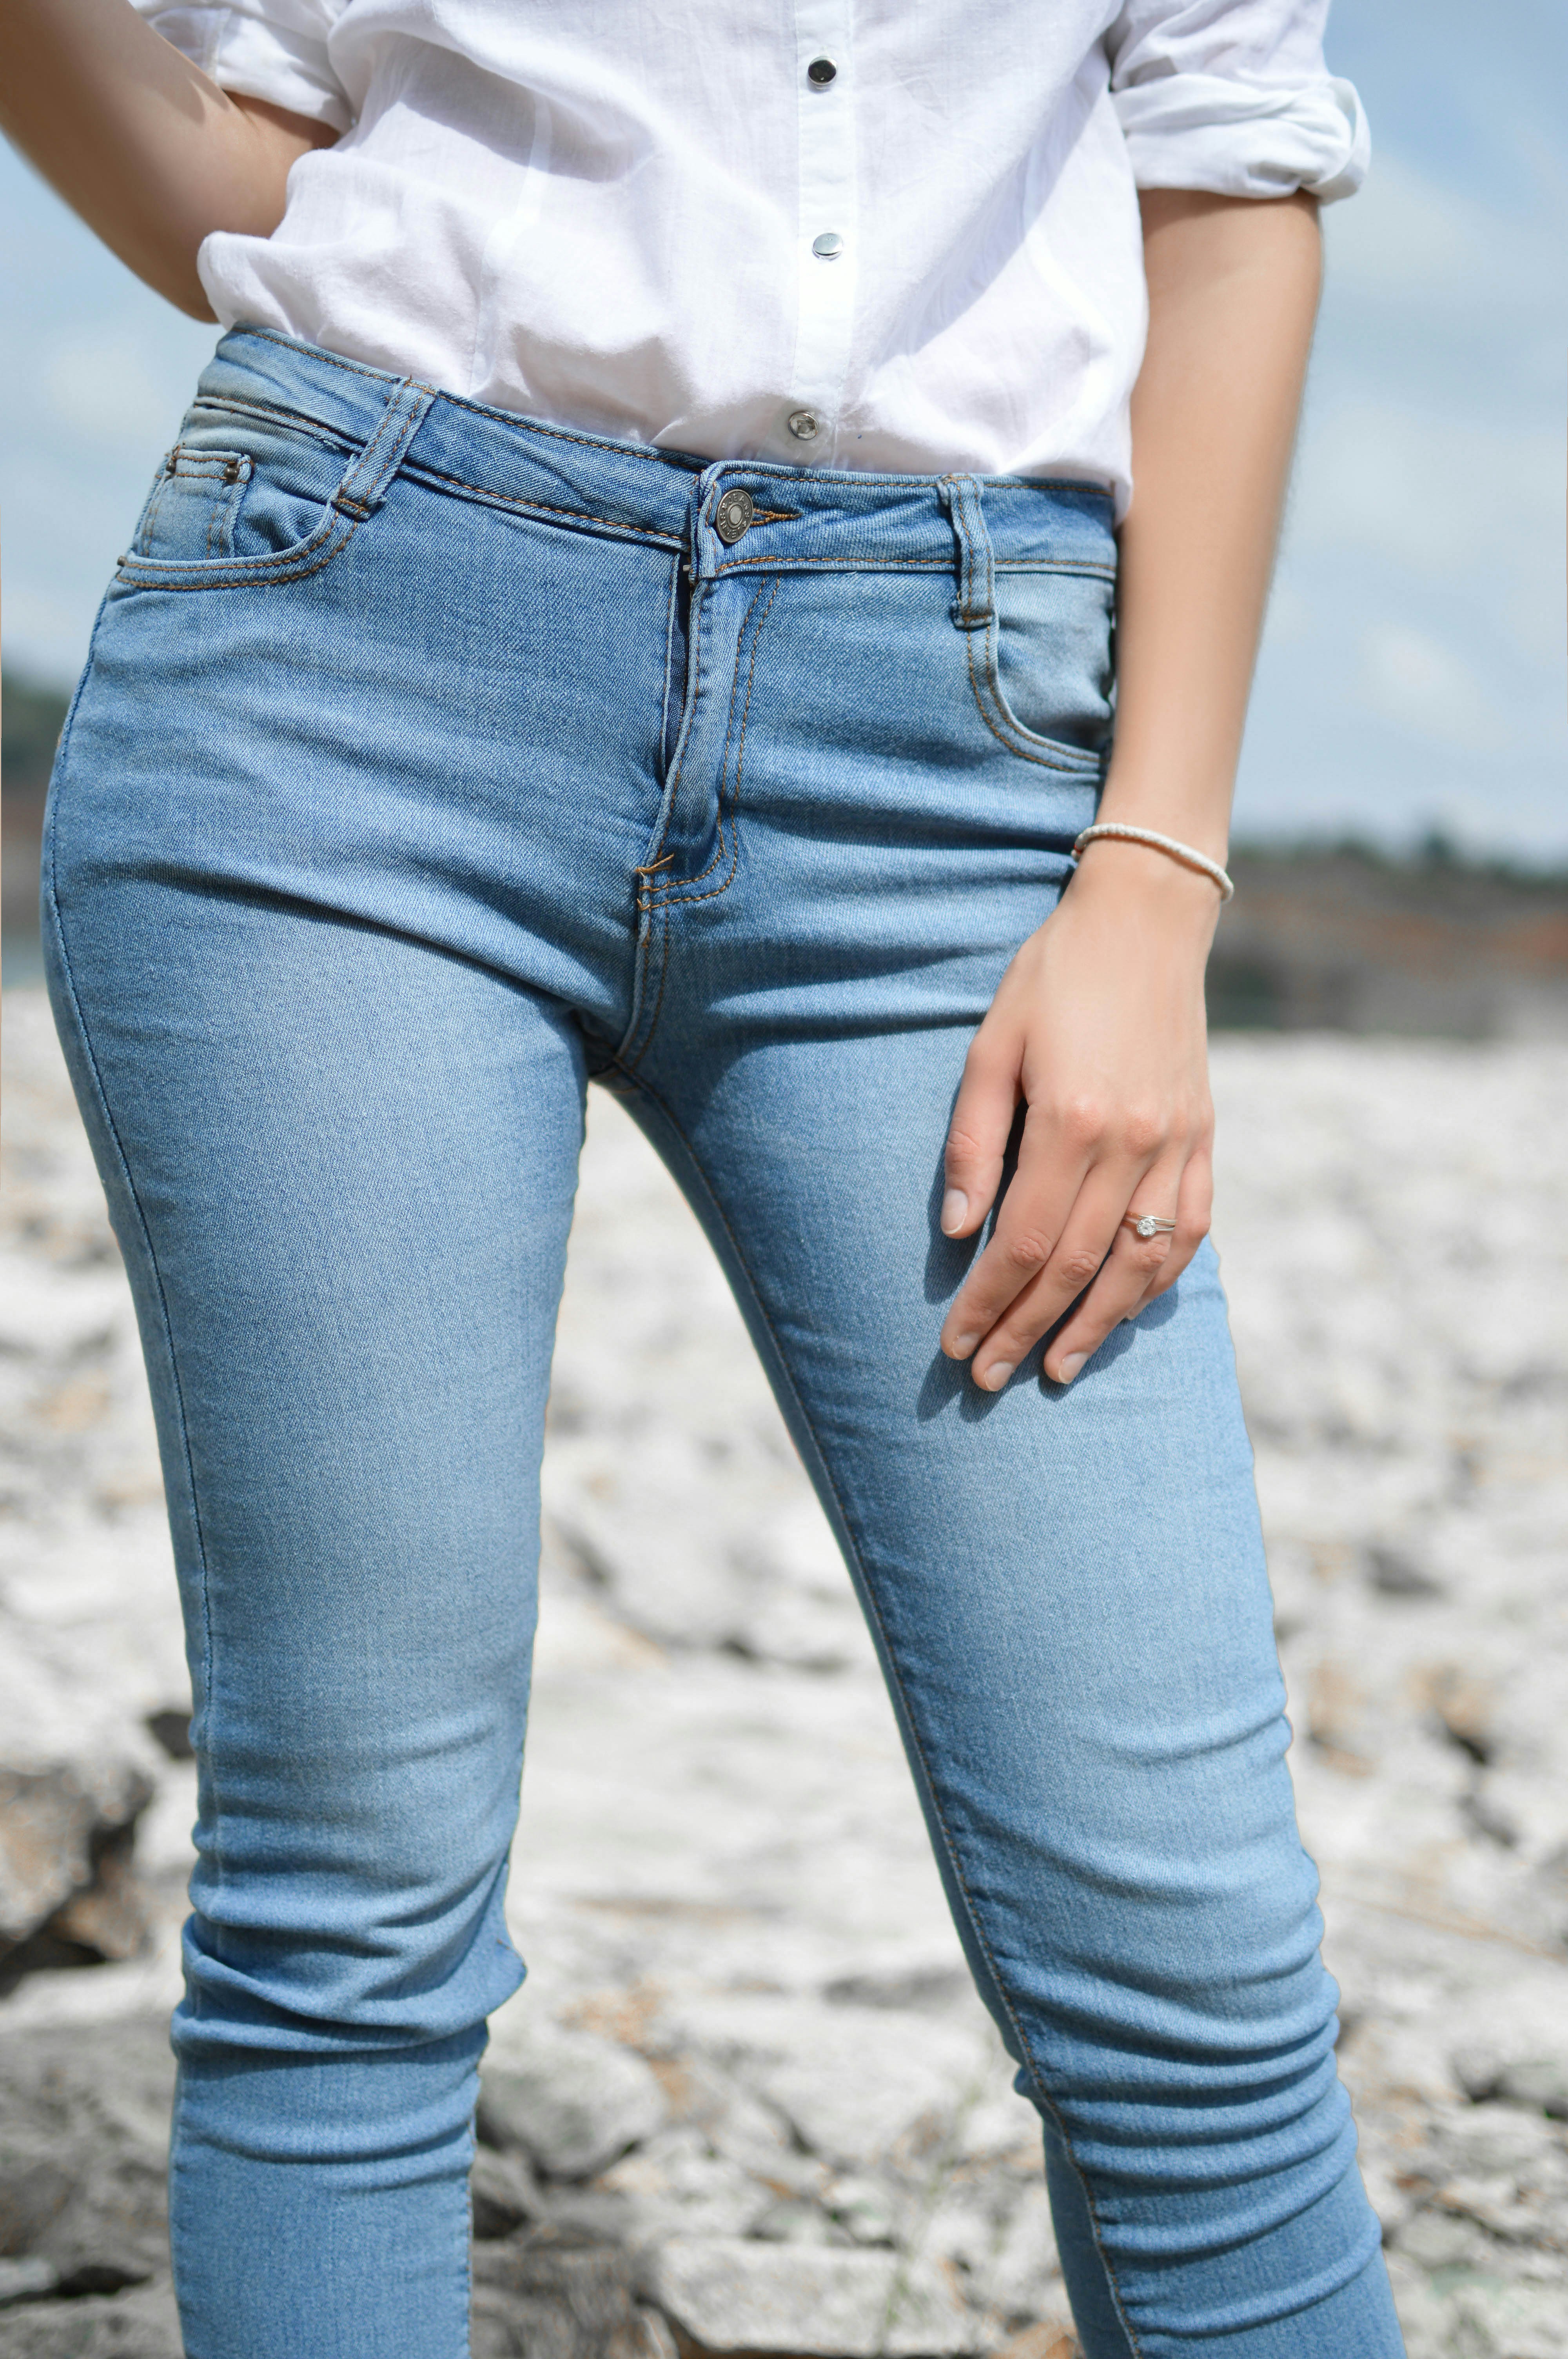 Read more: https://shinyhoney.com/blog-outfits-classic-jeans.html